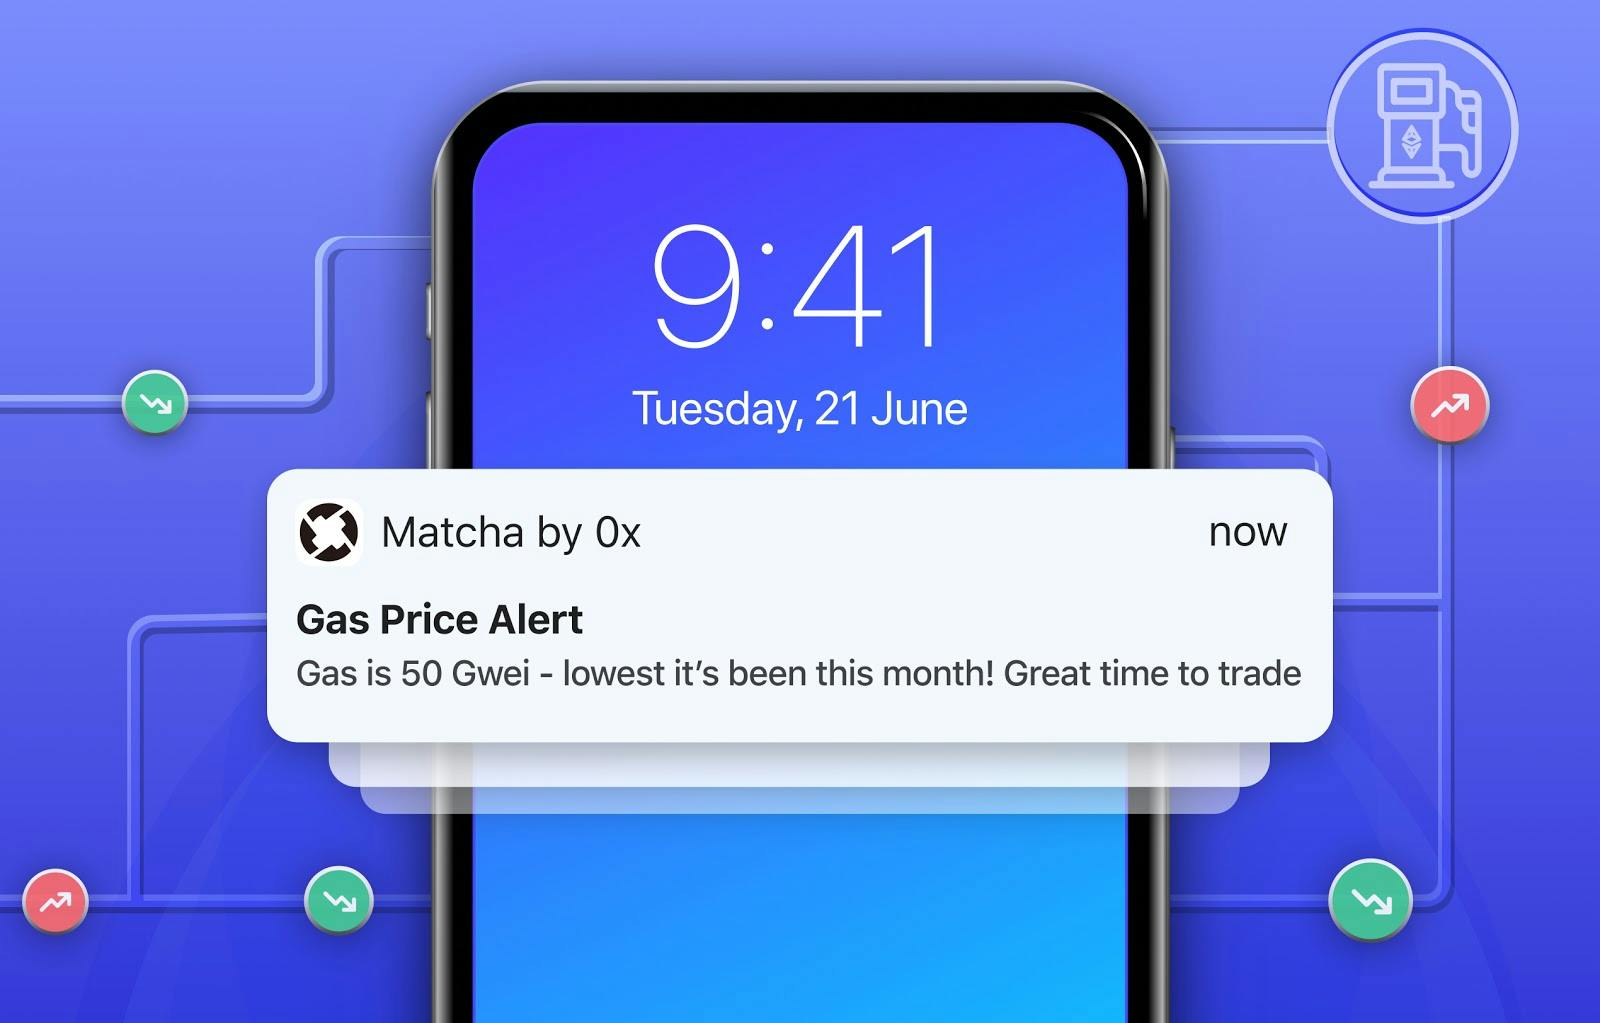 Illustration of user receiving mobile notifications for gas price updates by match0x Dapp.